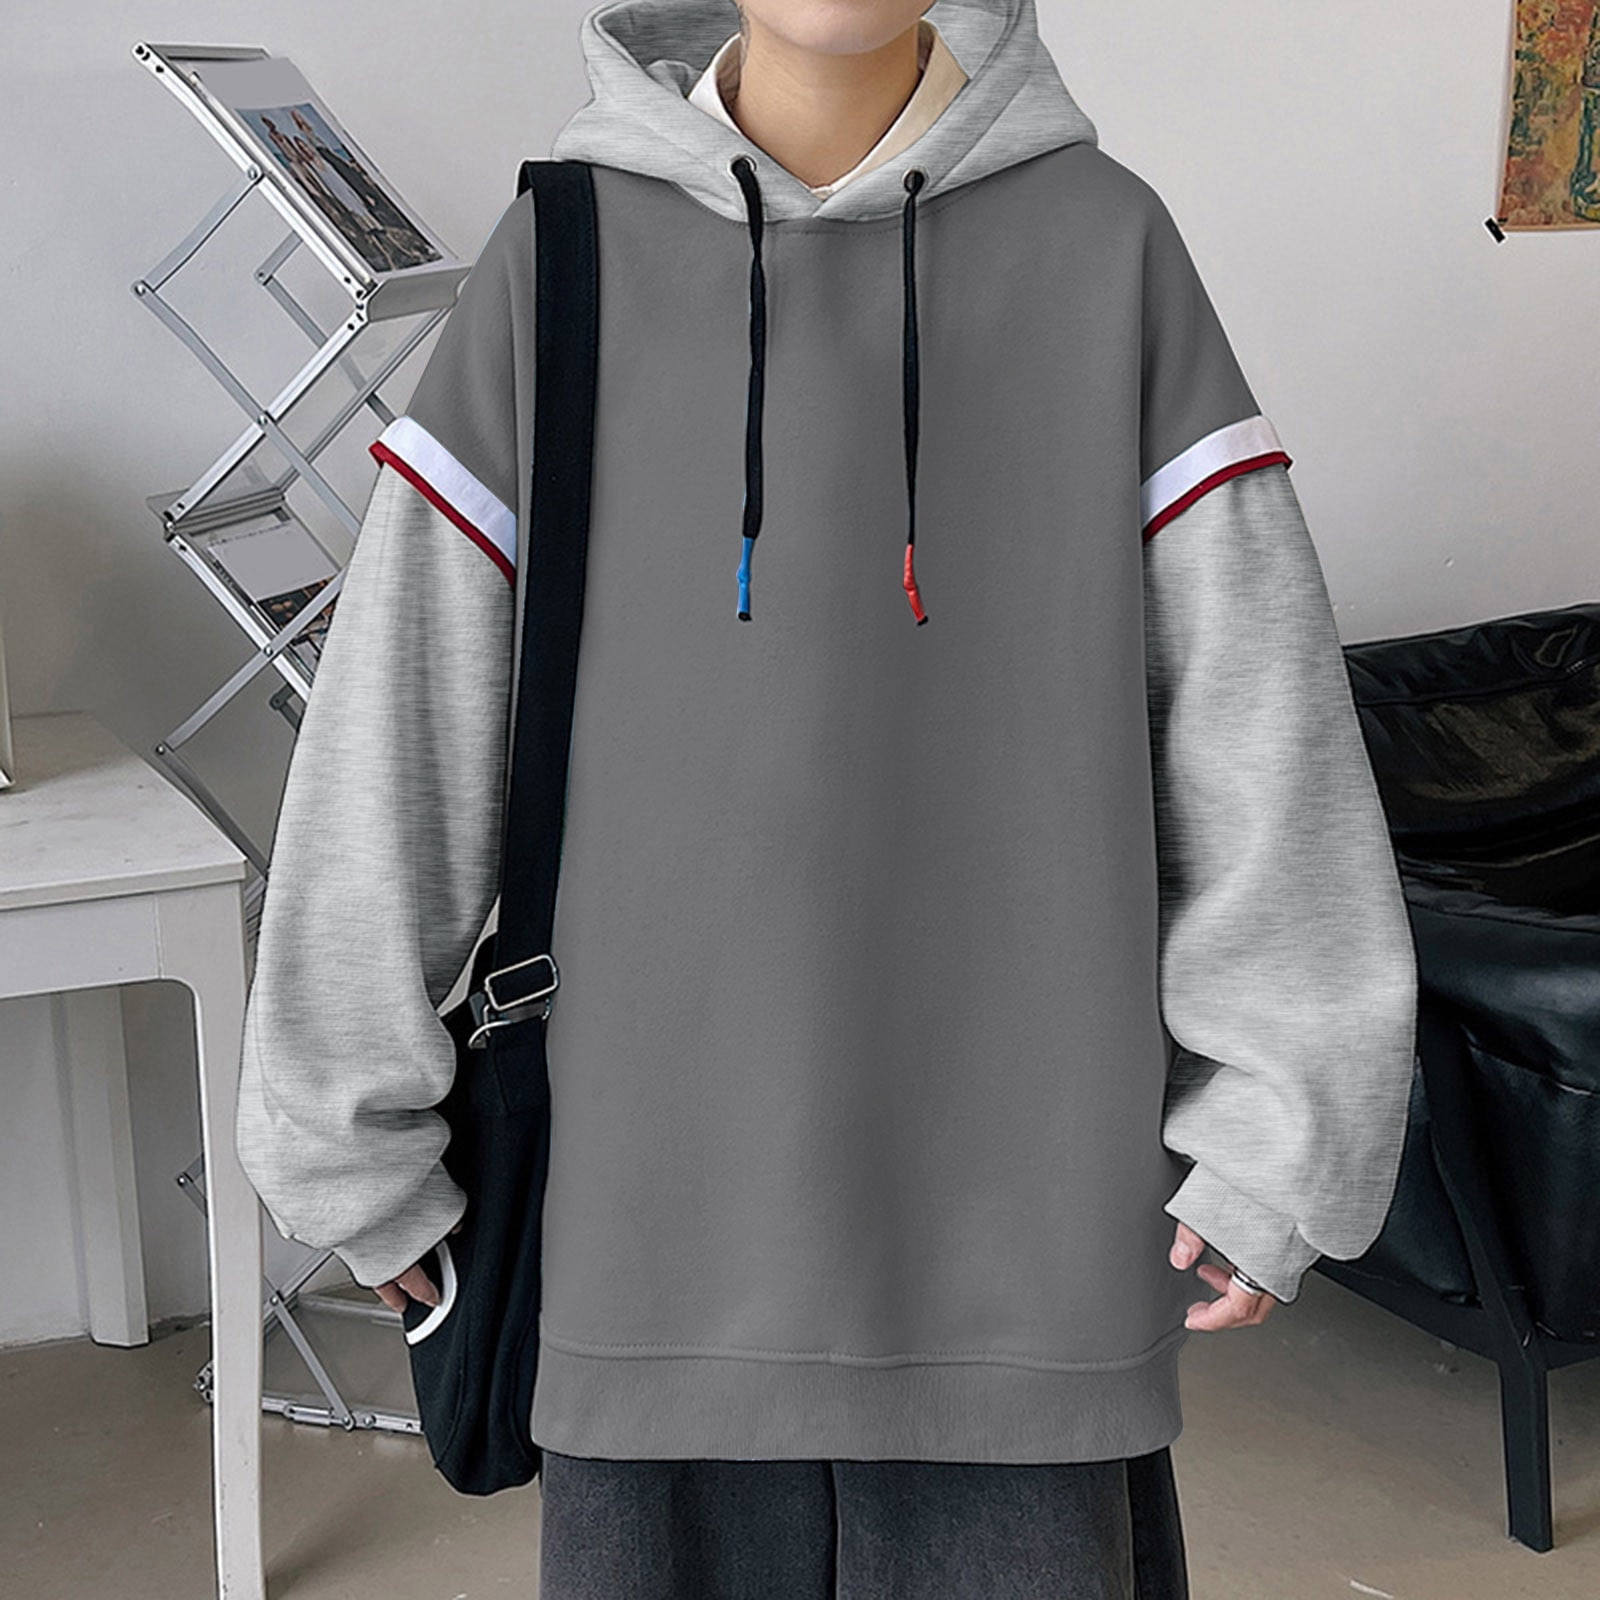 LEEy-world Mens Hoodies Graphic Men's Basic Designed Knitted